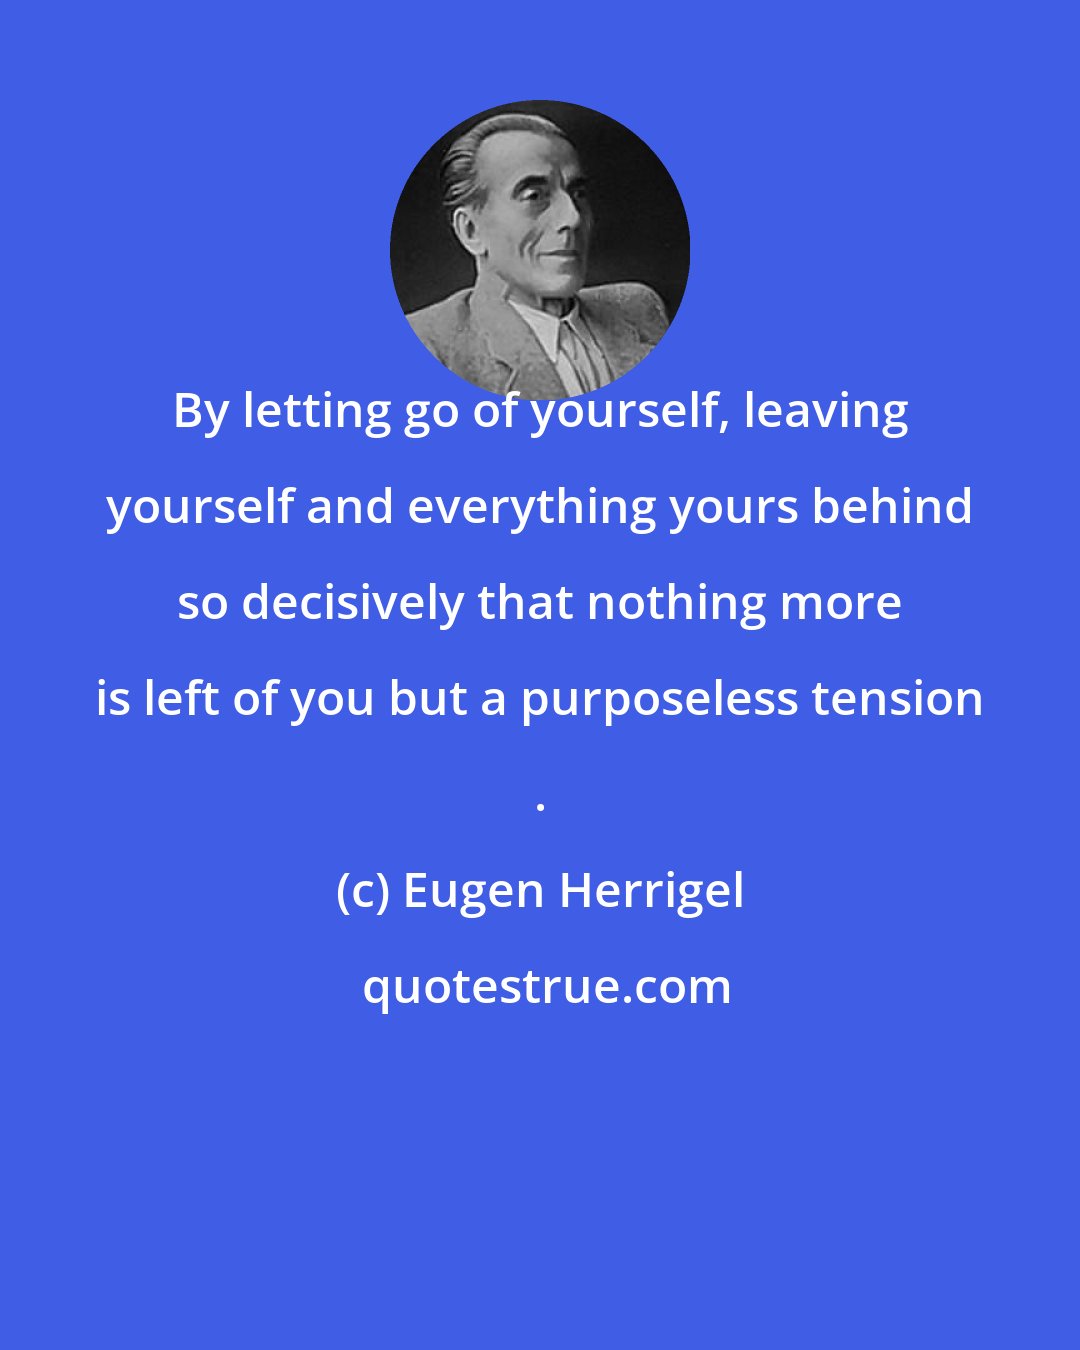 Eugen Herrigel: By letting go of yourself, leaving yourself and everything yours behind so decisively that nothing more is left of you but a purposeless tension .